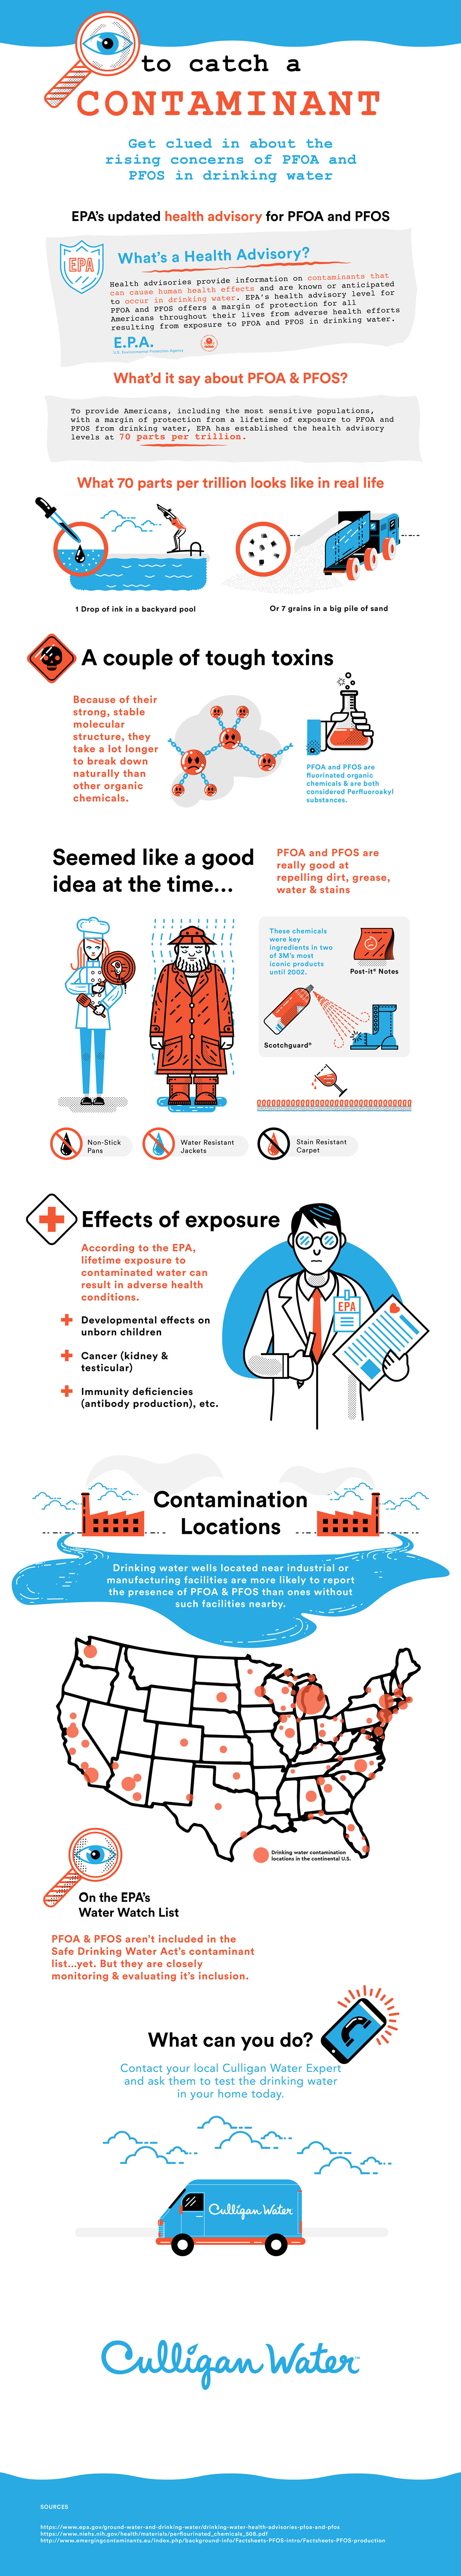 To catch a contaminant infographic